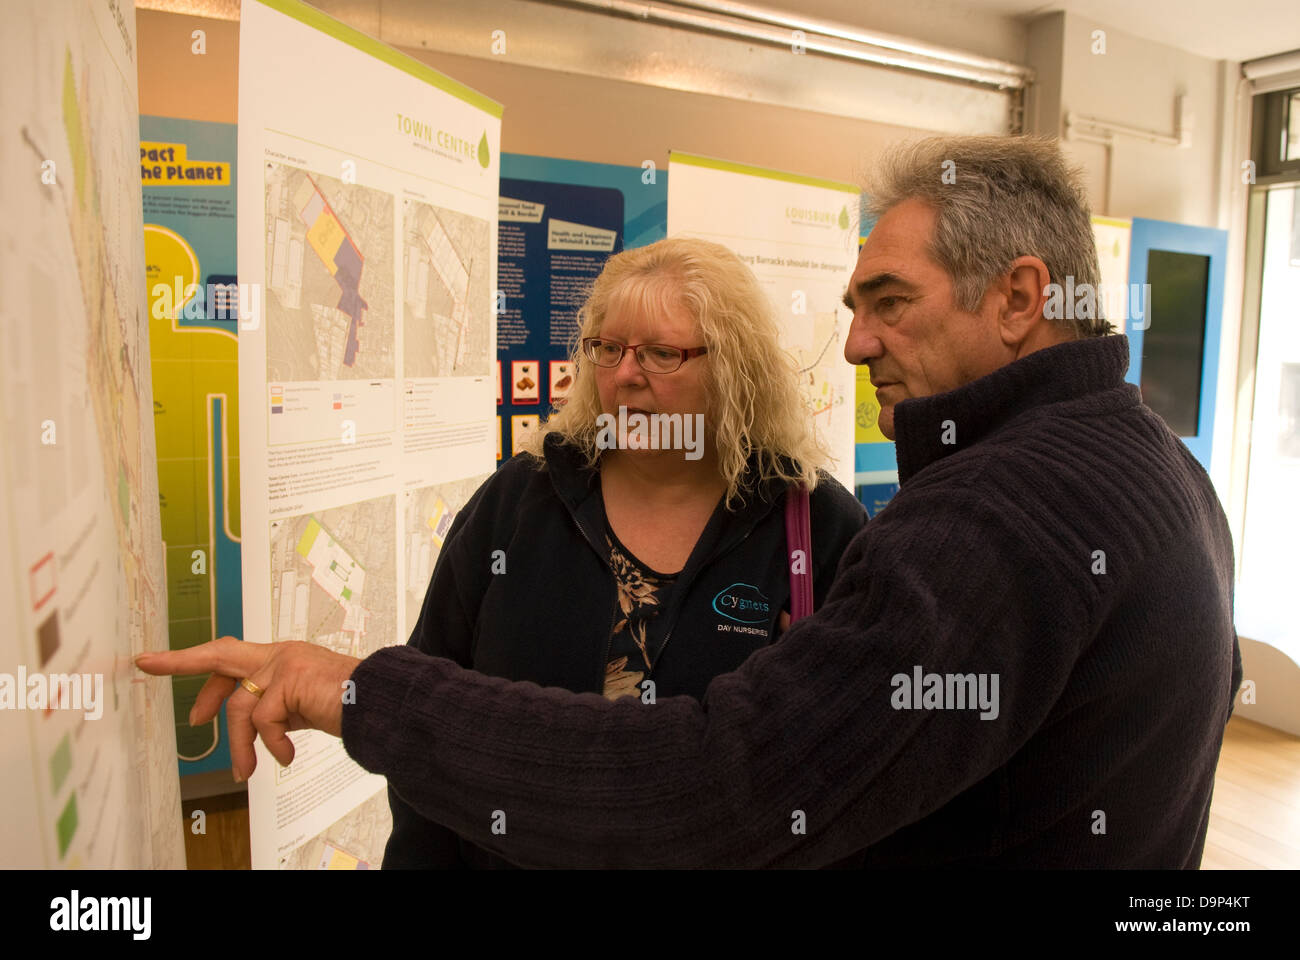 Local residents perusing plans for new eco town at Eco Station, Bordon, Hampshire, UK. Stock Photo